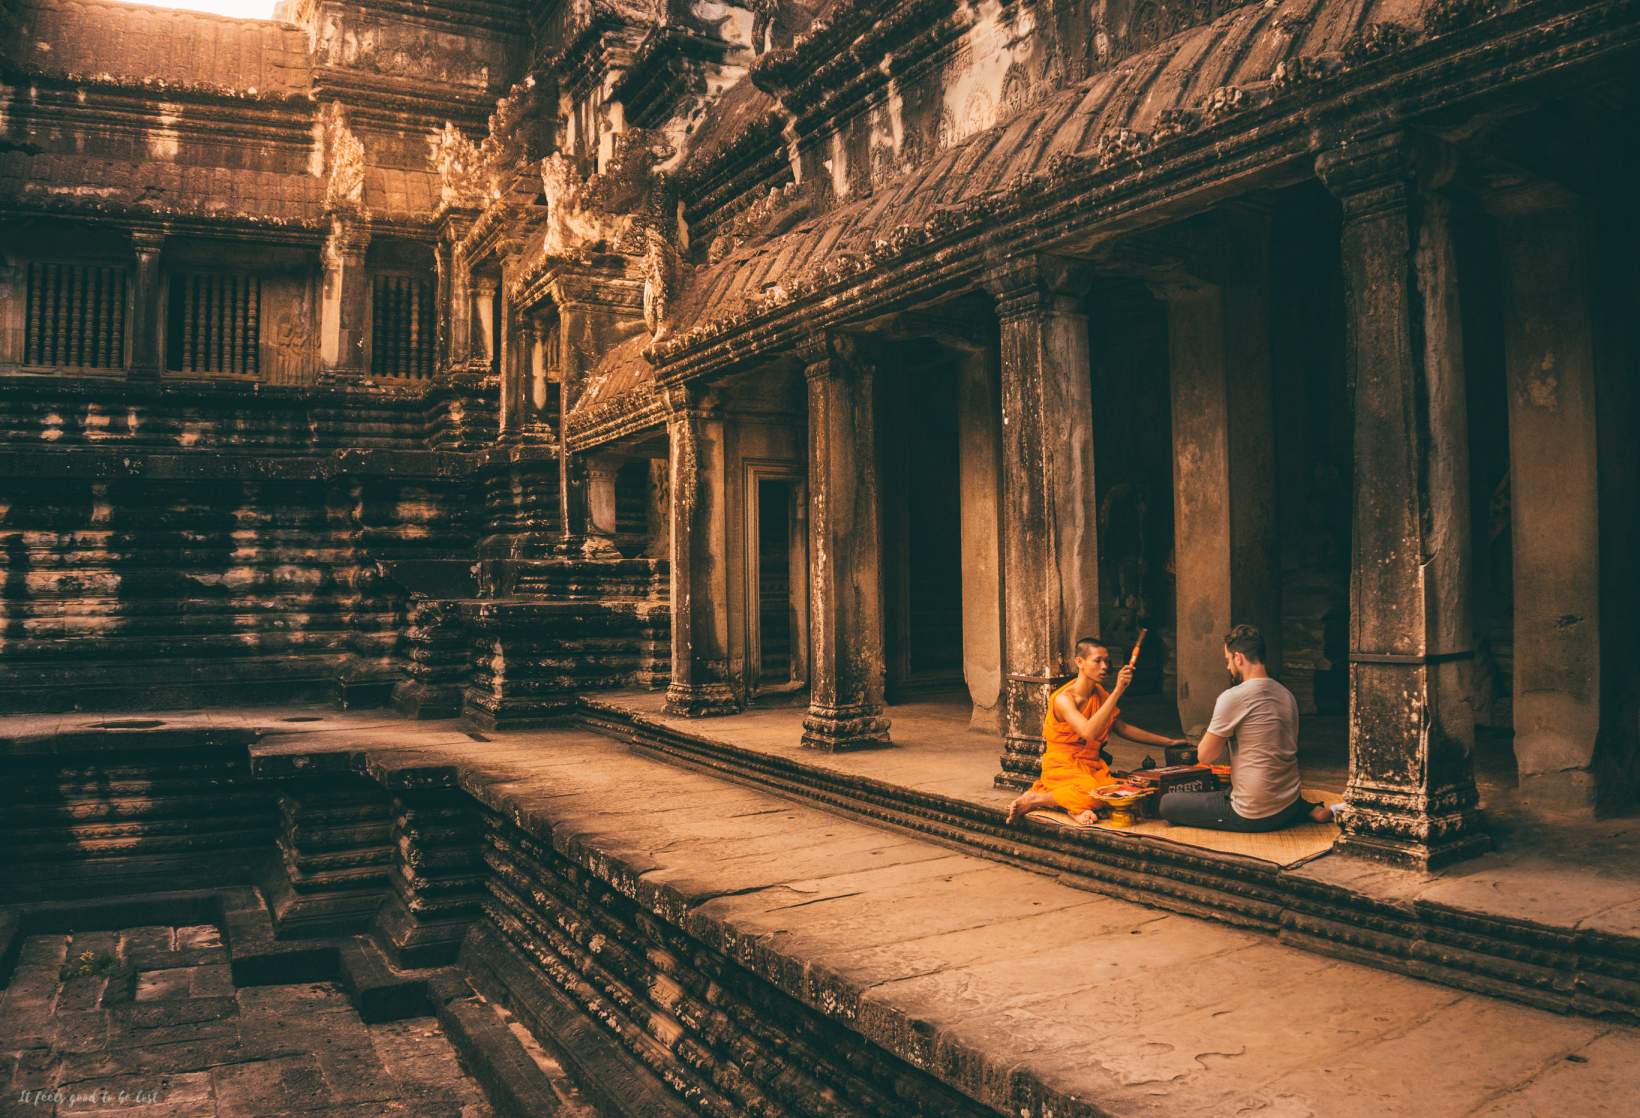 A monk in Angkor Wat